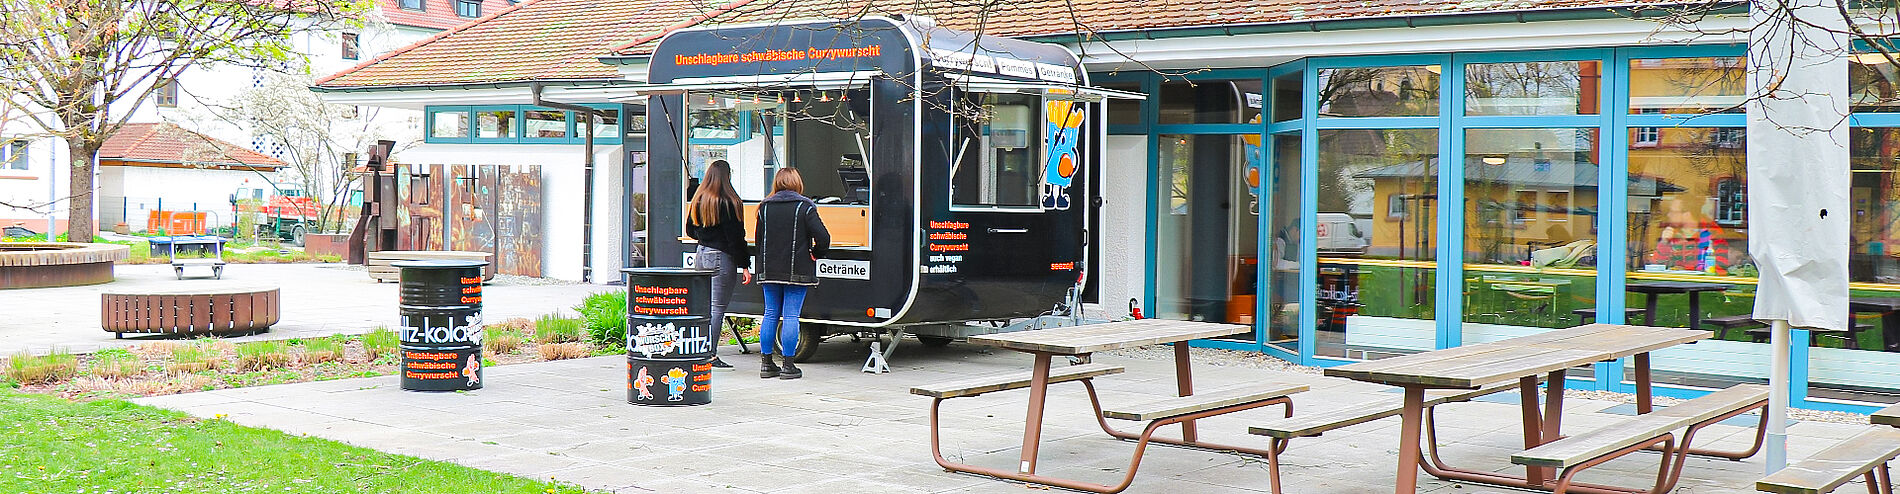 Terrace of Mensa Weingarten with food trailer "WurschtBox", two people standing in front of it